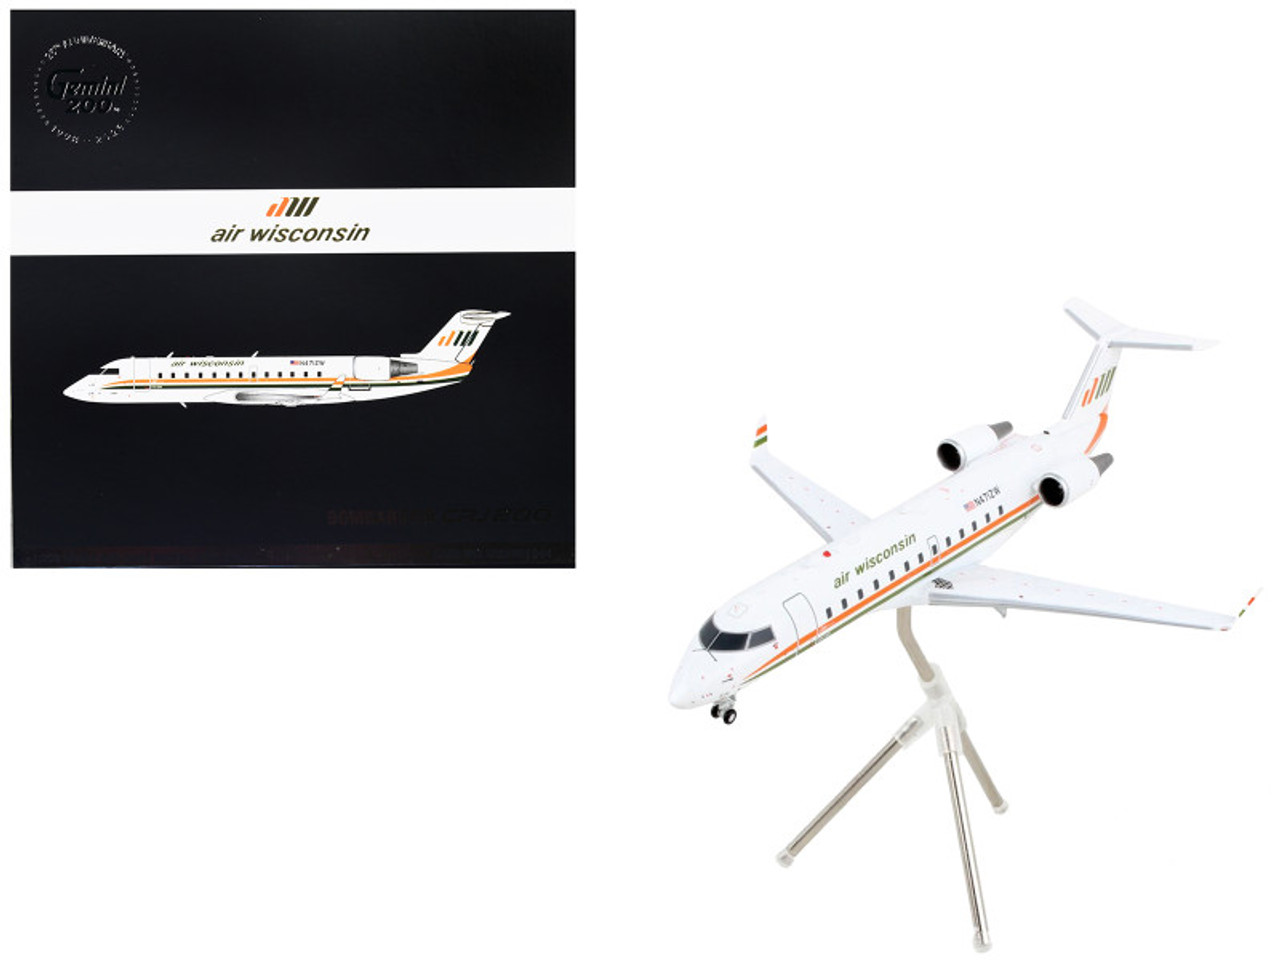 Bombardier CRJ200 Commercial Aircraft "Air Wisconsin" White with Orange and Green Stripes "Gemini 200" Series 1/200 Diecast Model Airplane by GeminiJets